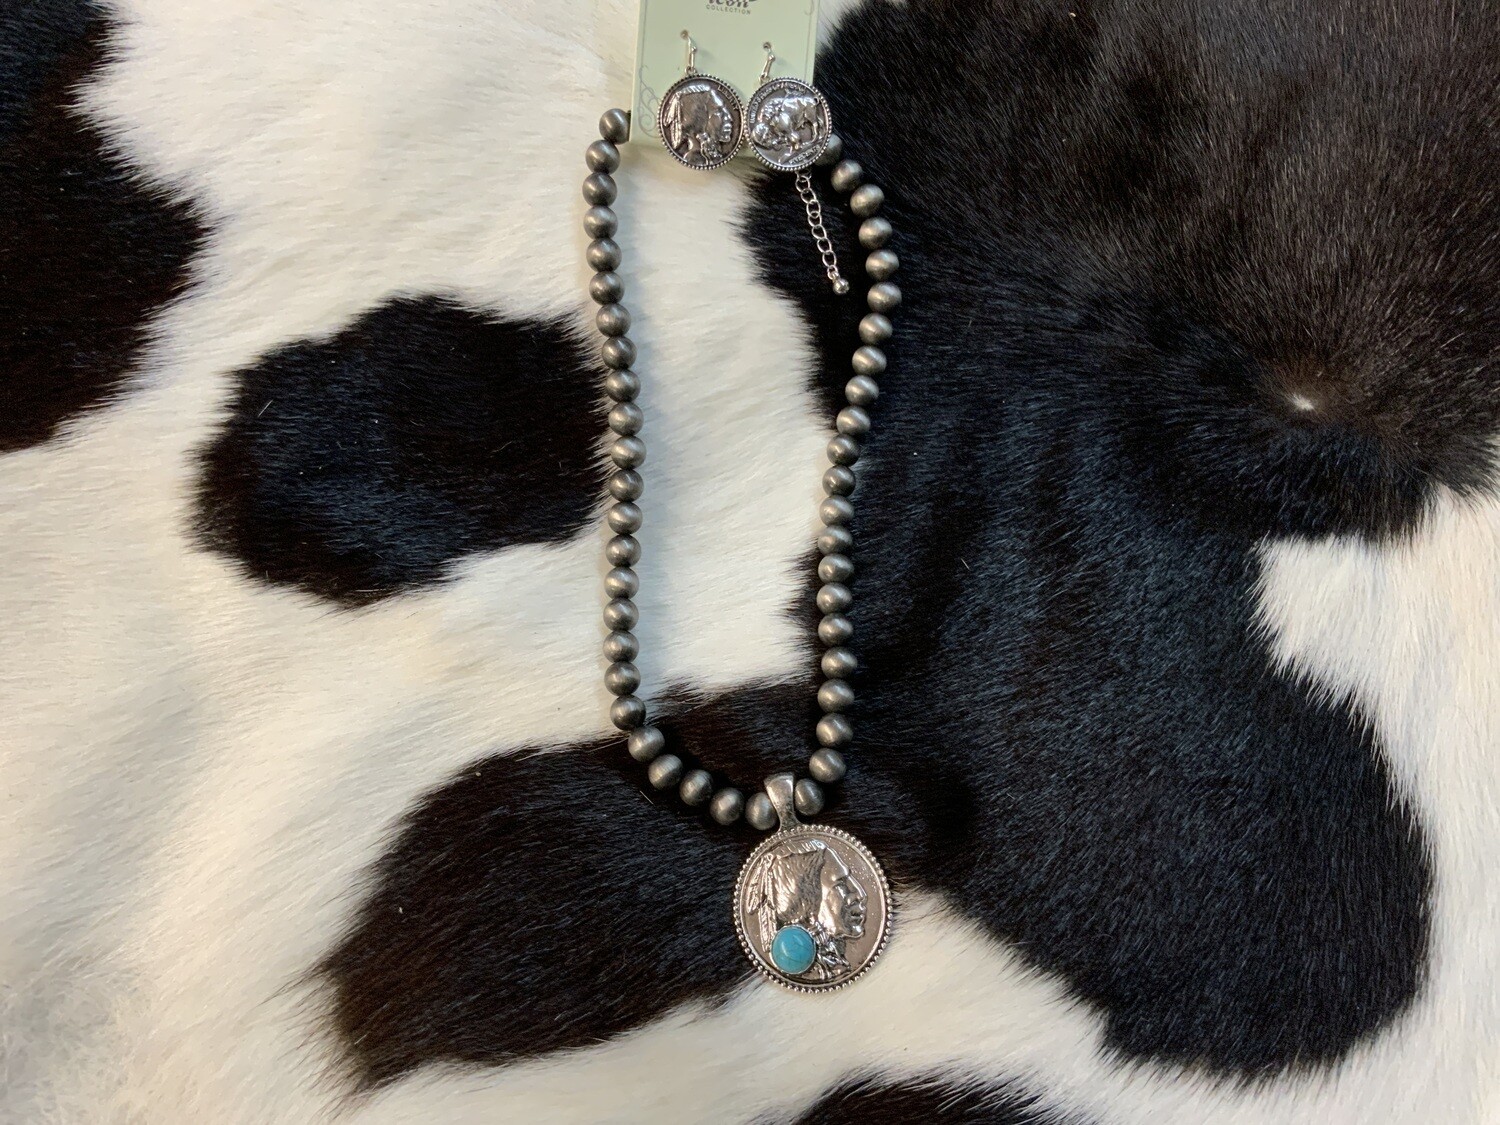 Indian Coin Necklace with Turquoise Stone 